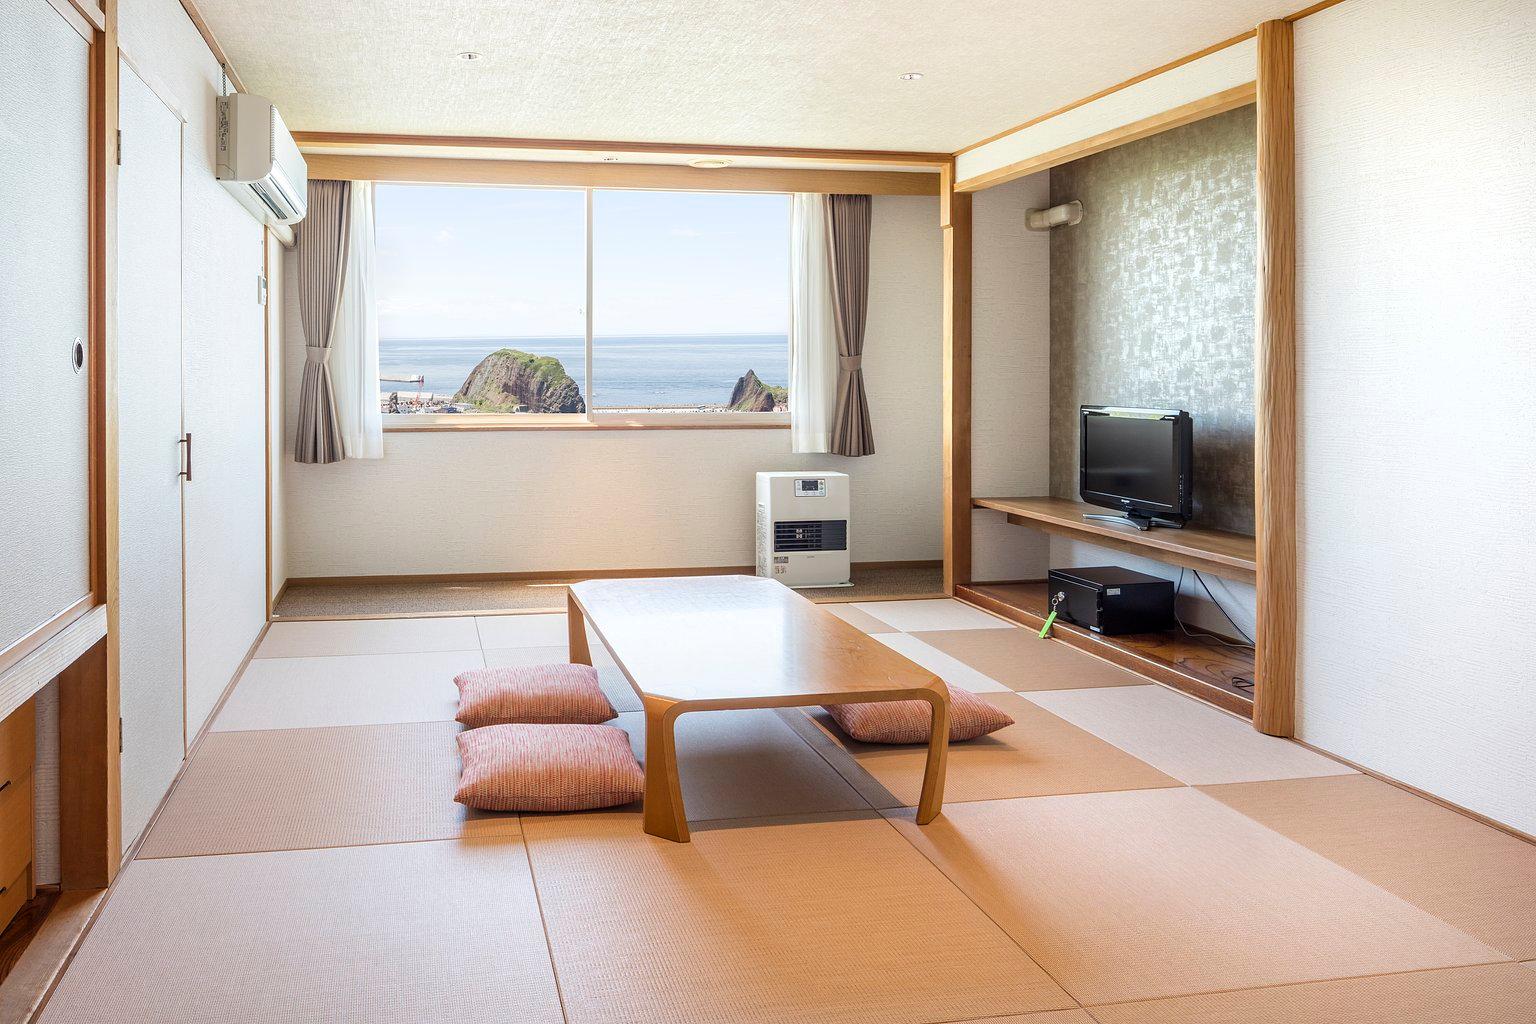 Japanese-style room without private bath on the top floor - 知床日落閃耀之家 ONSEN HOSTEL（知床日落閃耀之家溫泉旅館）